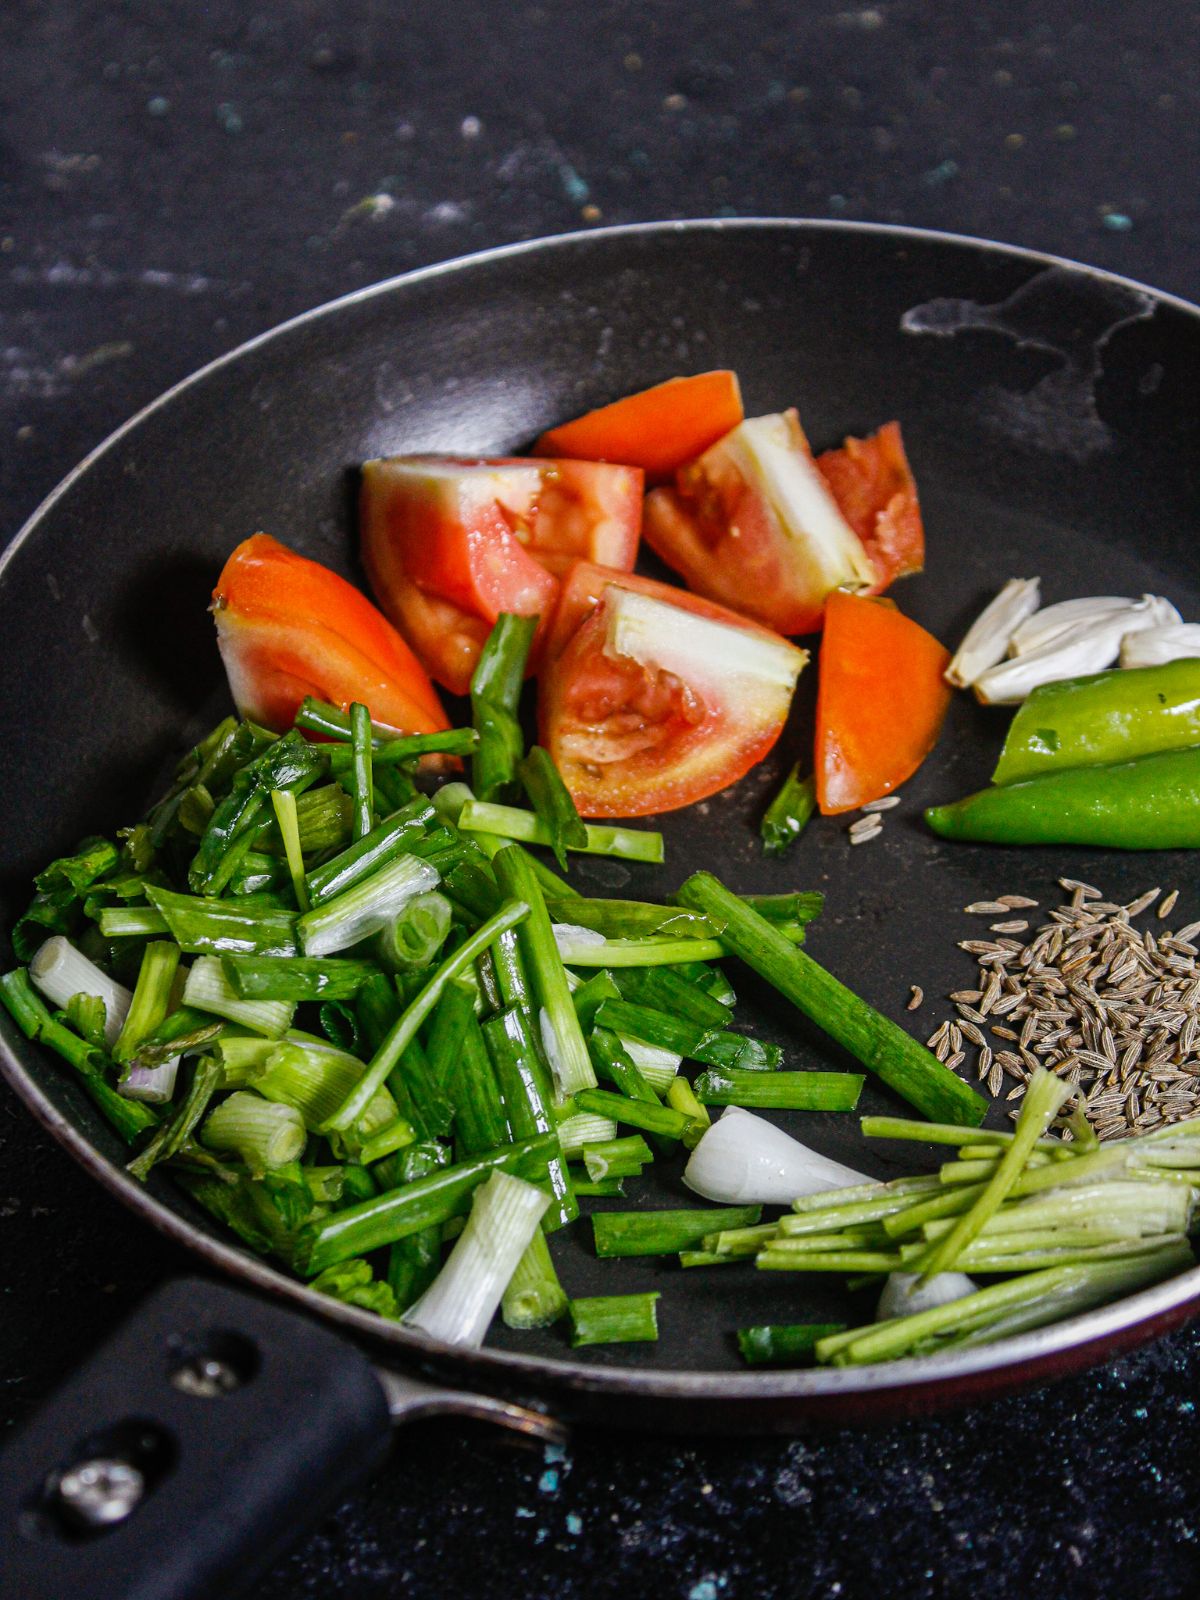 Add all the ingredients for Spring Onion Tomato Chutney into the pan